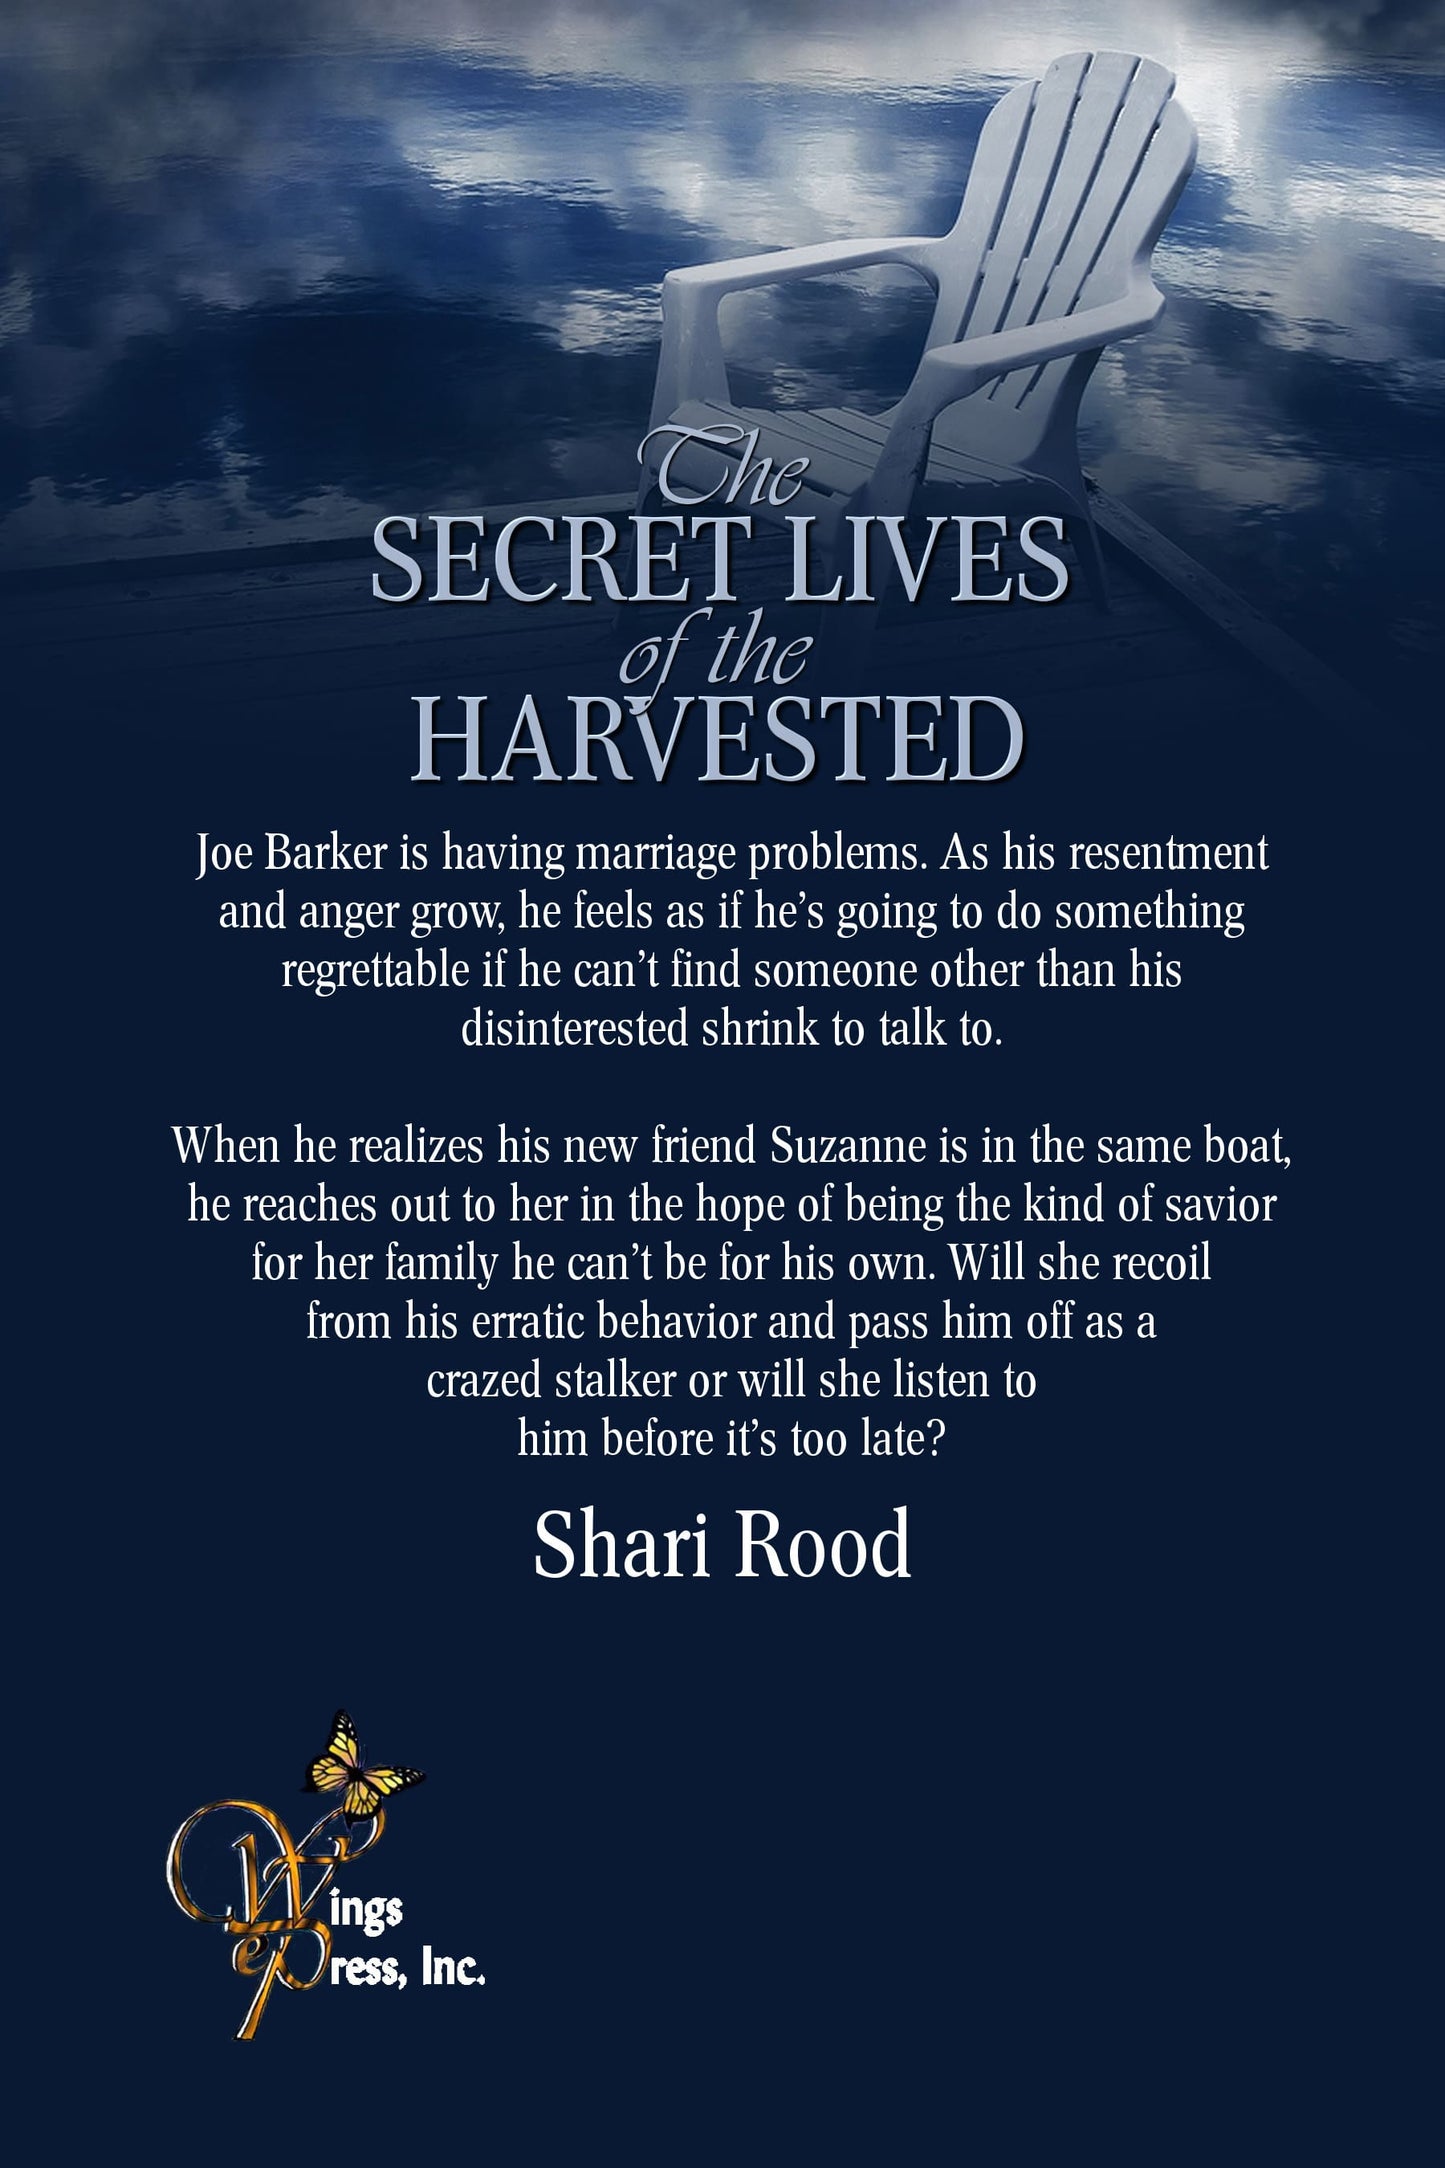 The Secret Lives of the Harvested